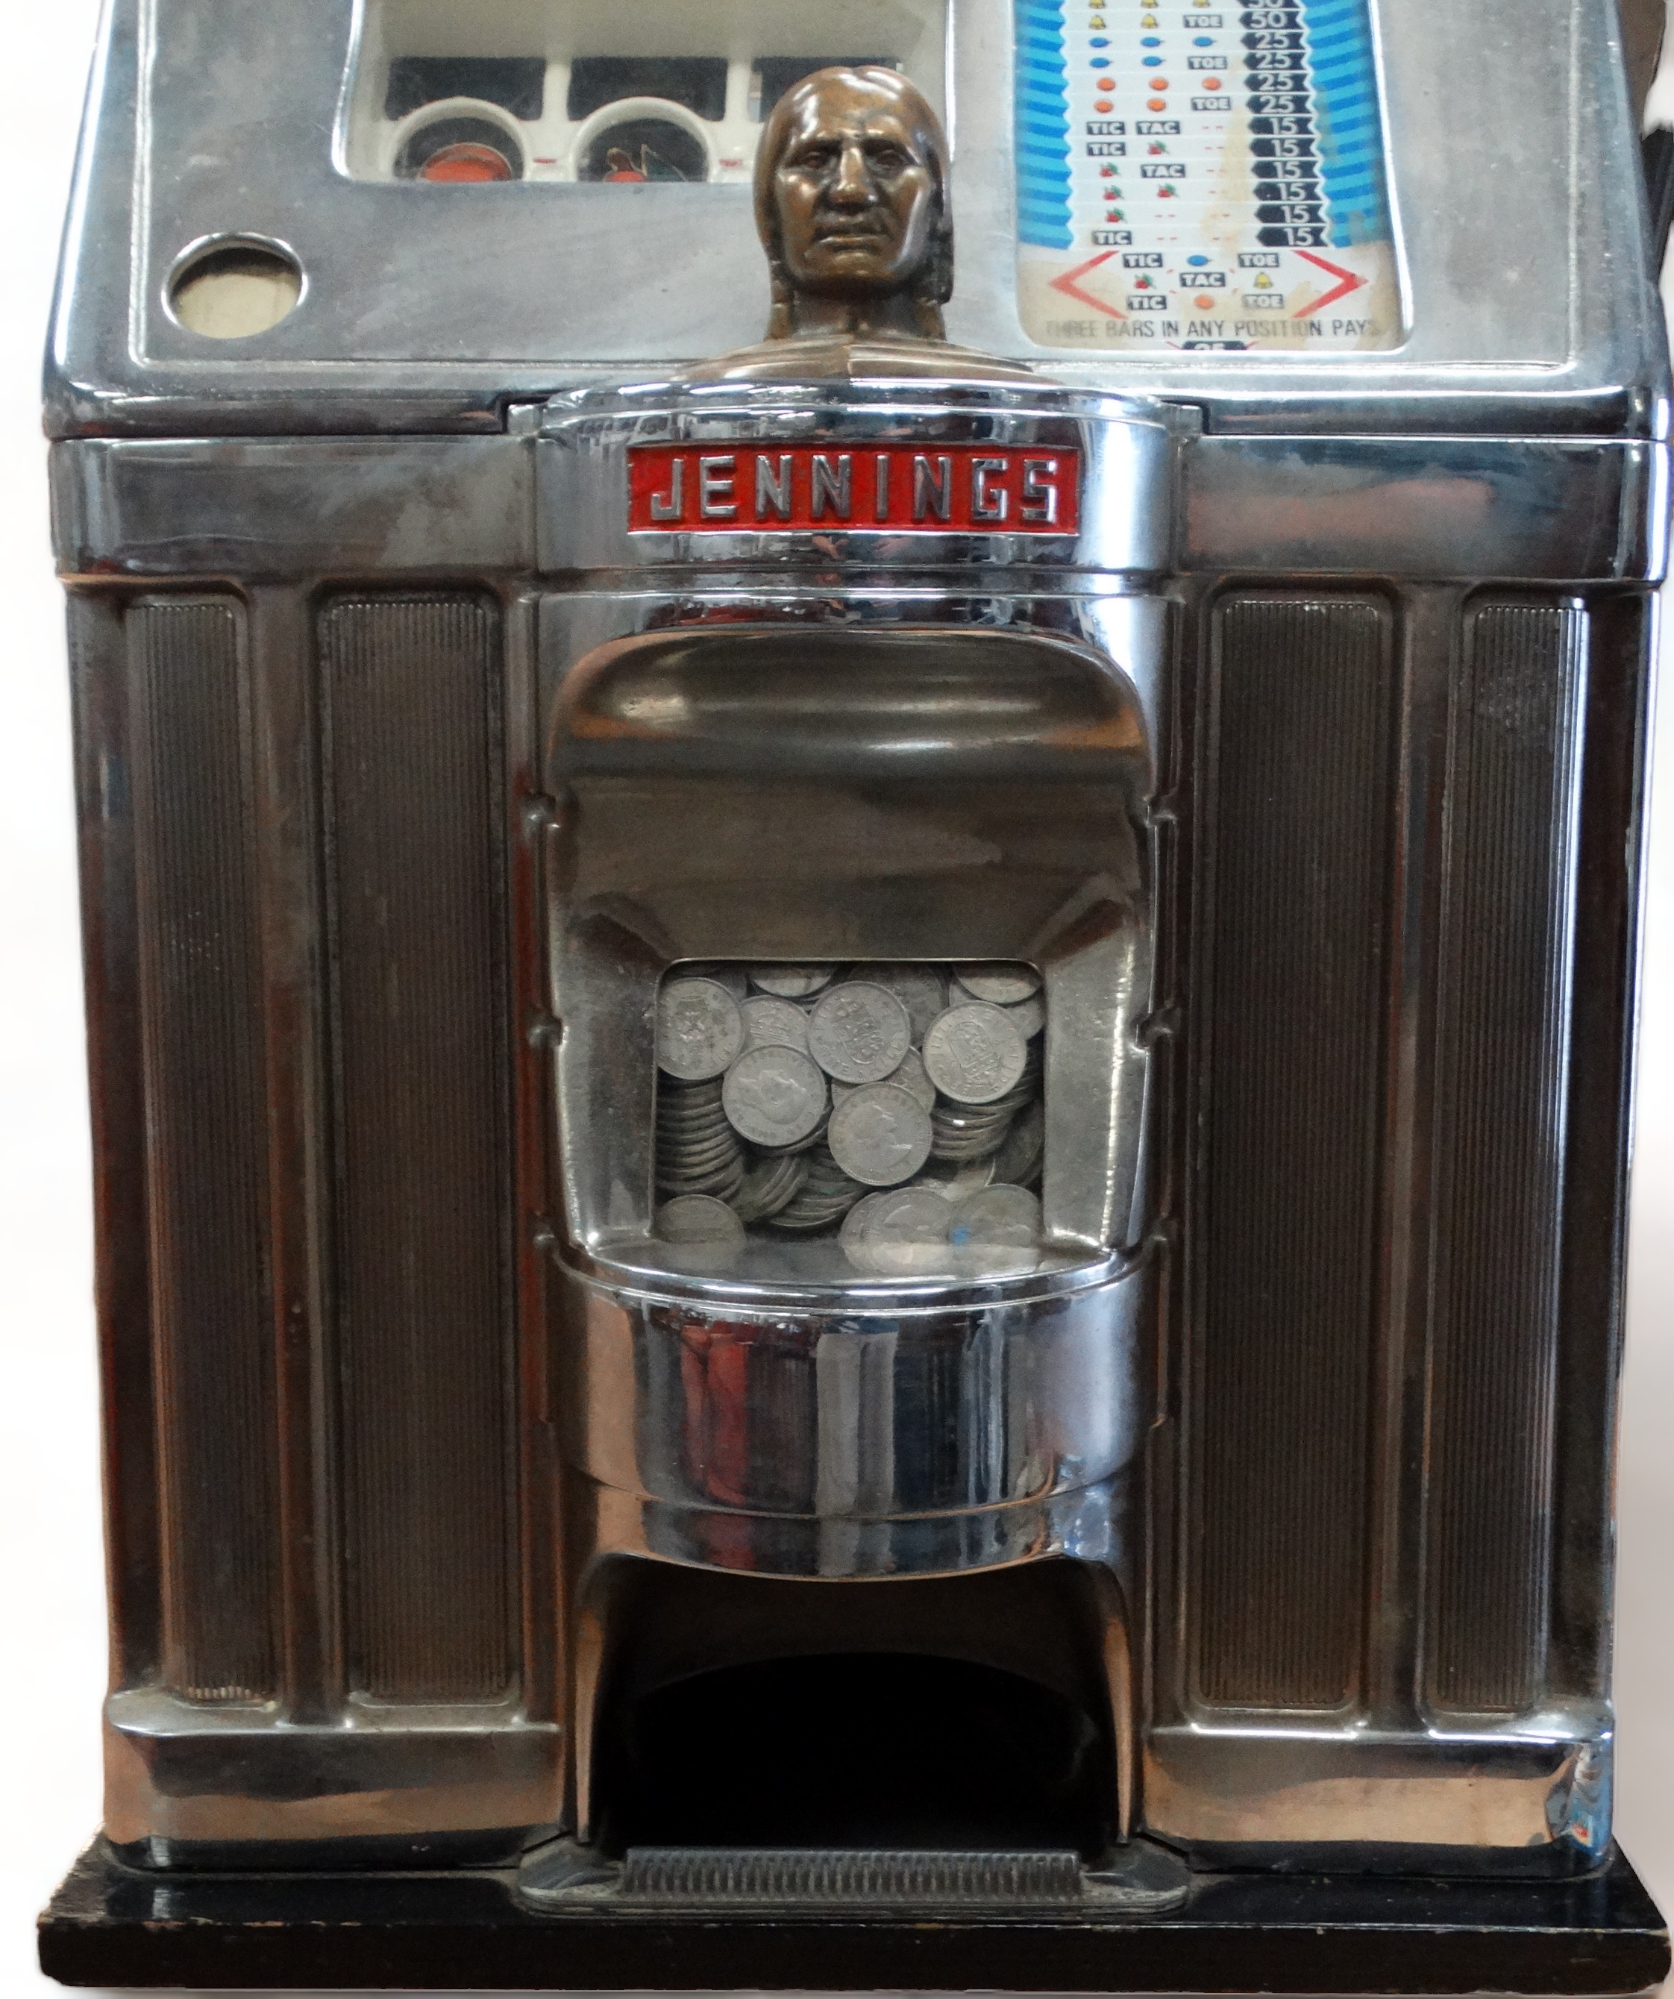 A Jennings-Governor mid 20th century American one arm bandit slot machine - chrome case with Tic- - Image 2 of 4